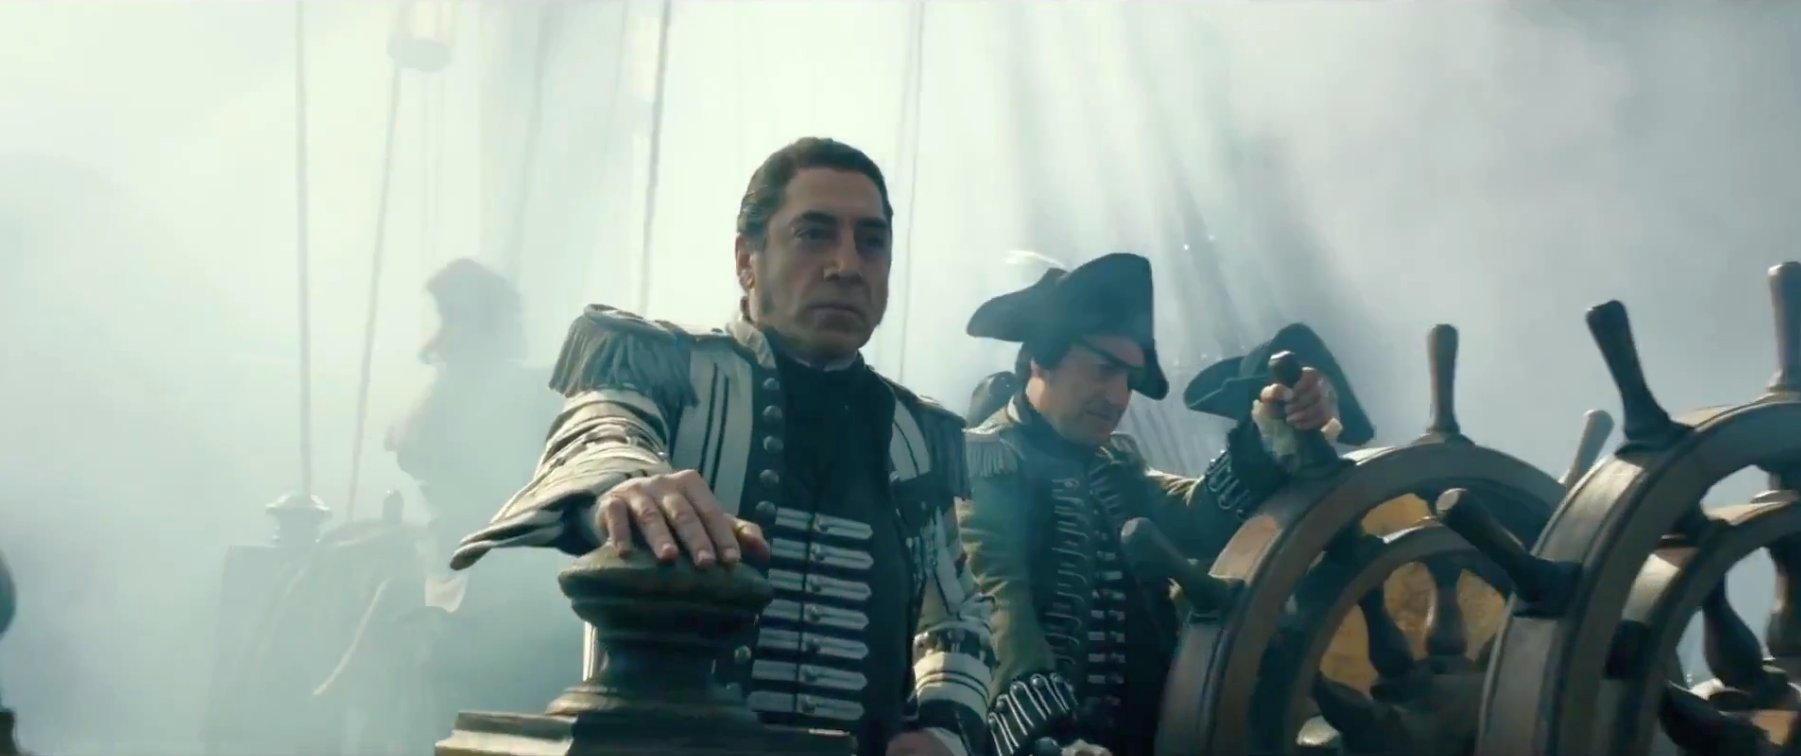 Pirates of the Caribbean: Dead Men Tell No Tales Trailer Is Here